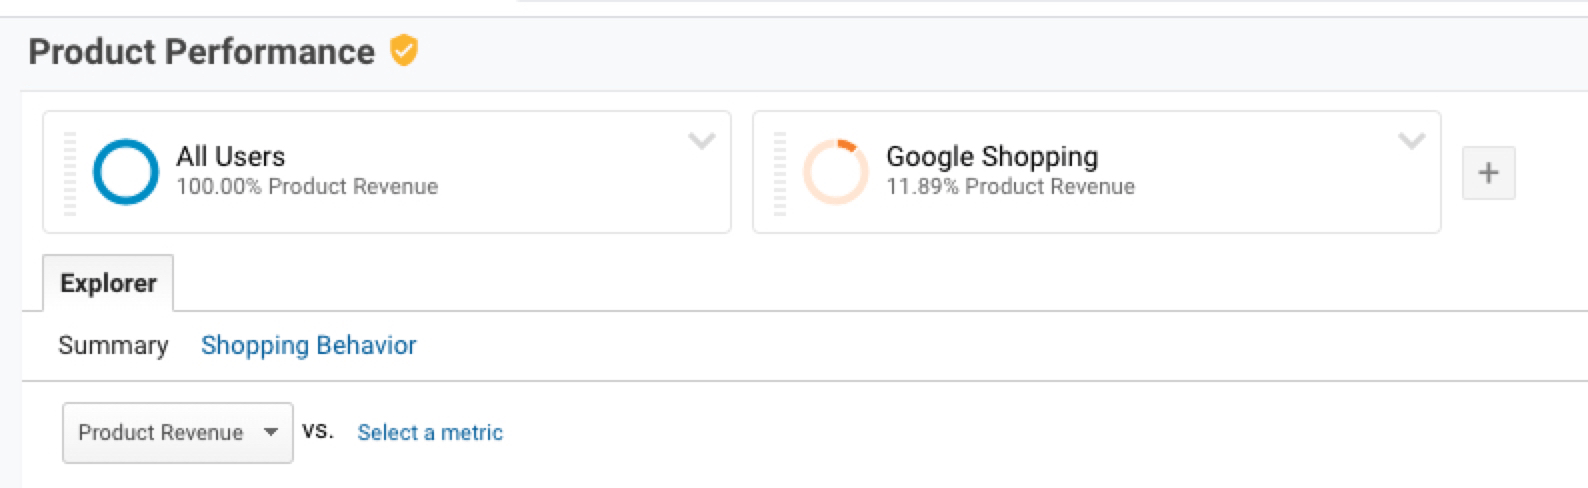 Traffic from Google Shopping